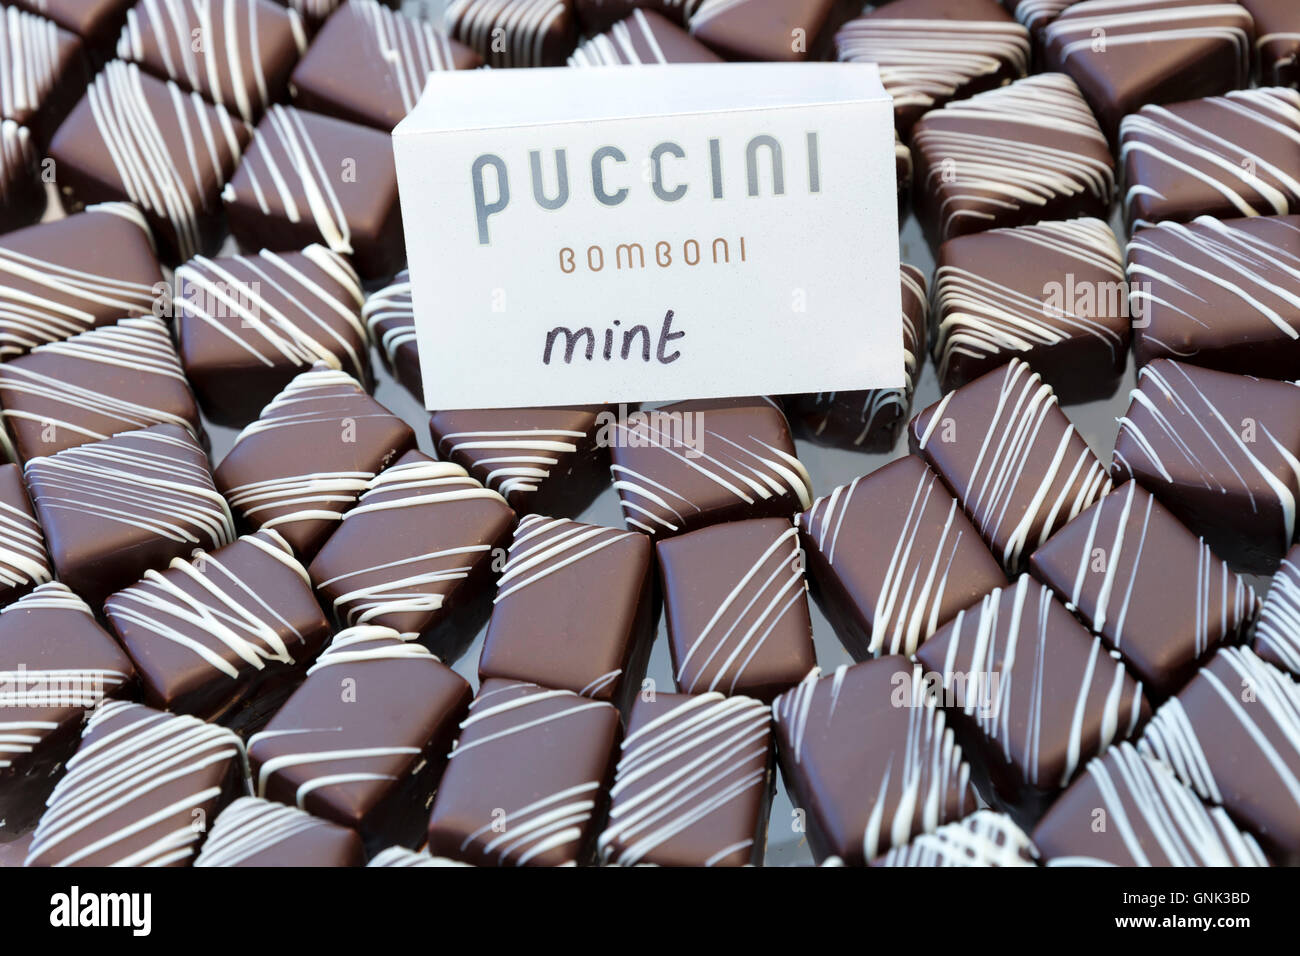 Puccini Bomboni chocolate shop selling exotic mint chocolates as treats in the Old Town of Amsterdam, Holland Stock Photo